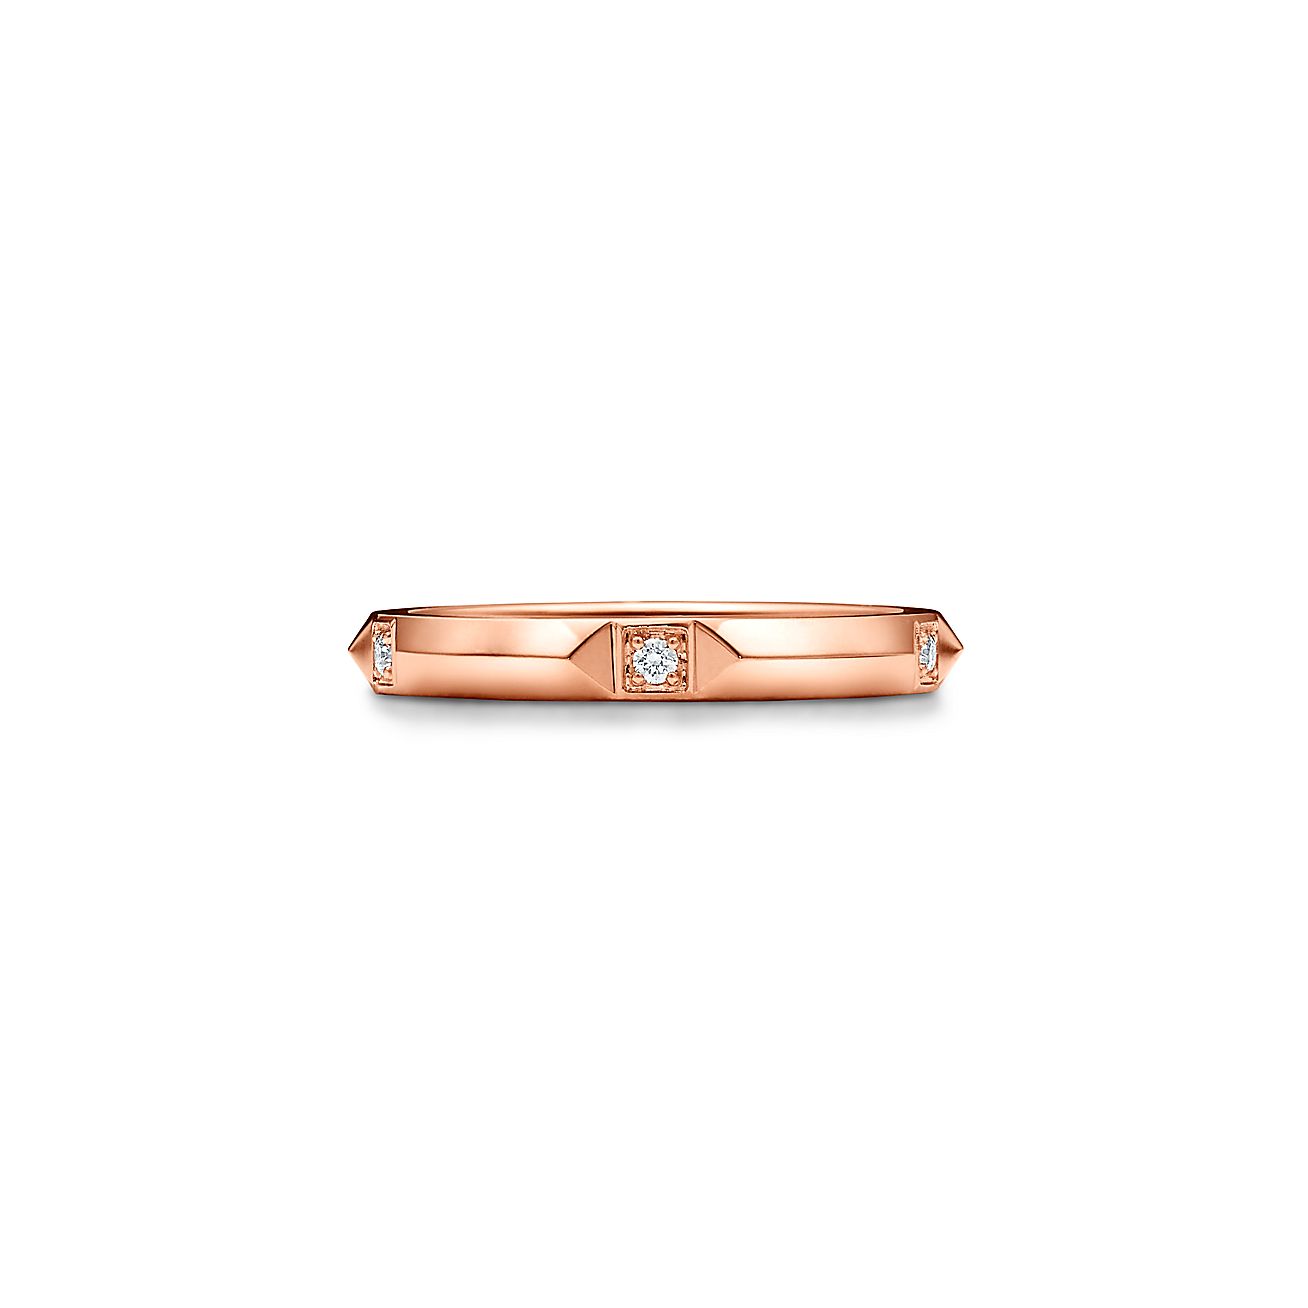 Tiffany True™Band Ring
in 18k Rose Gold with Diamonds, 2.5 mm Wide